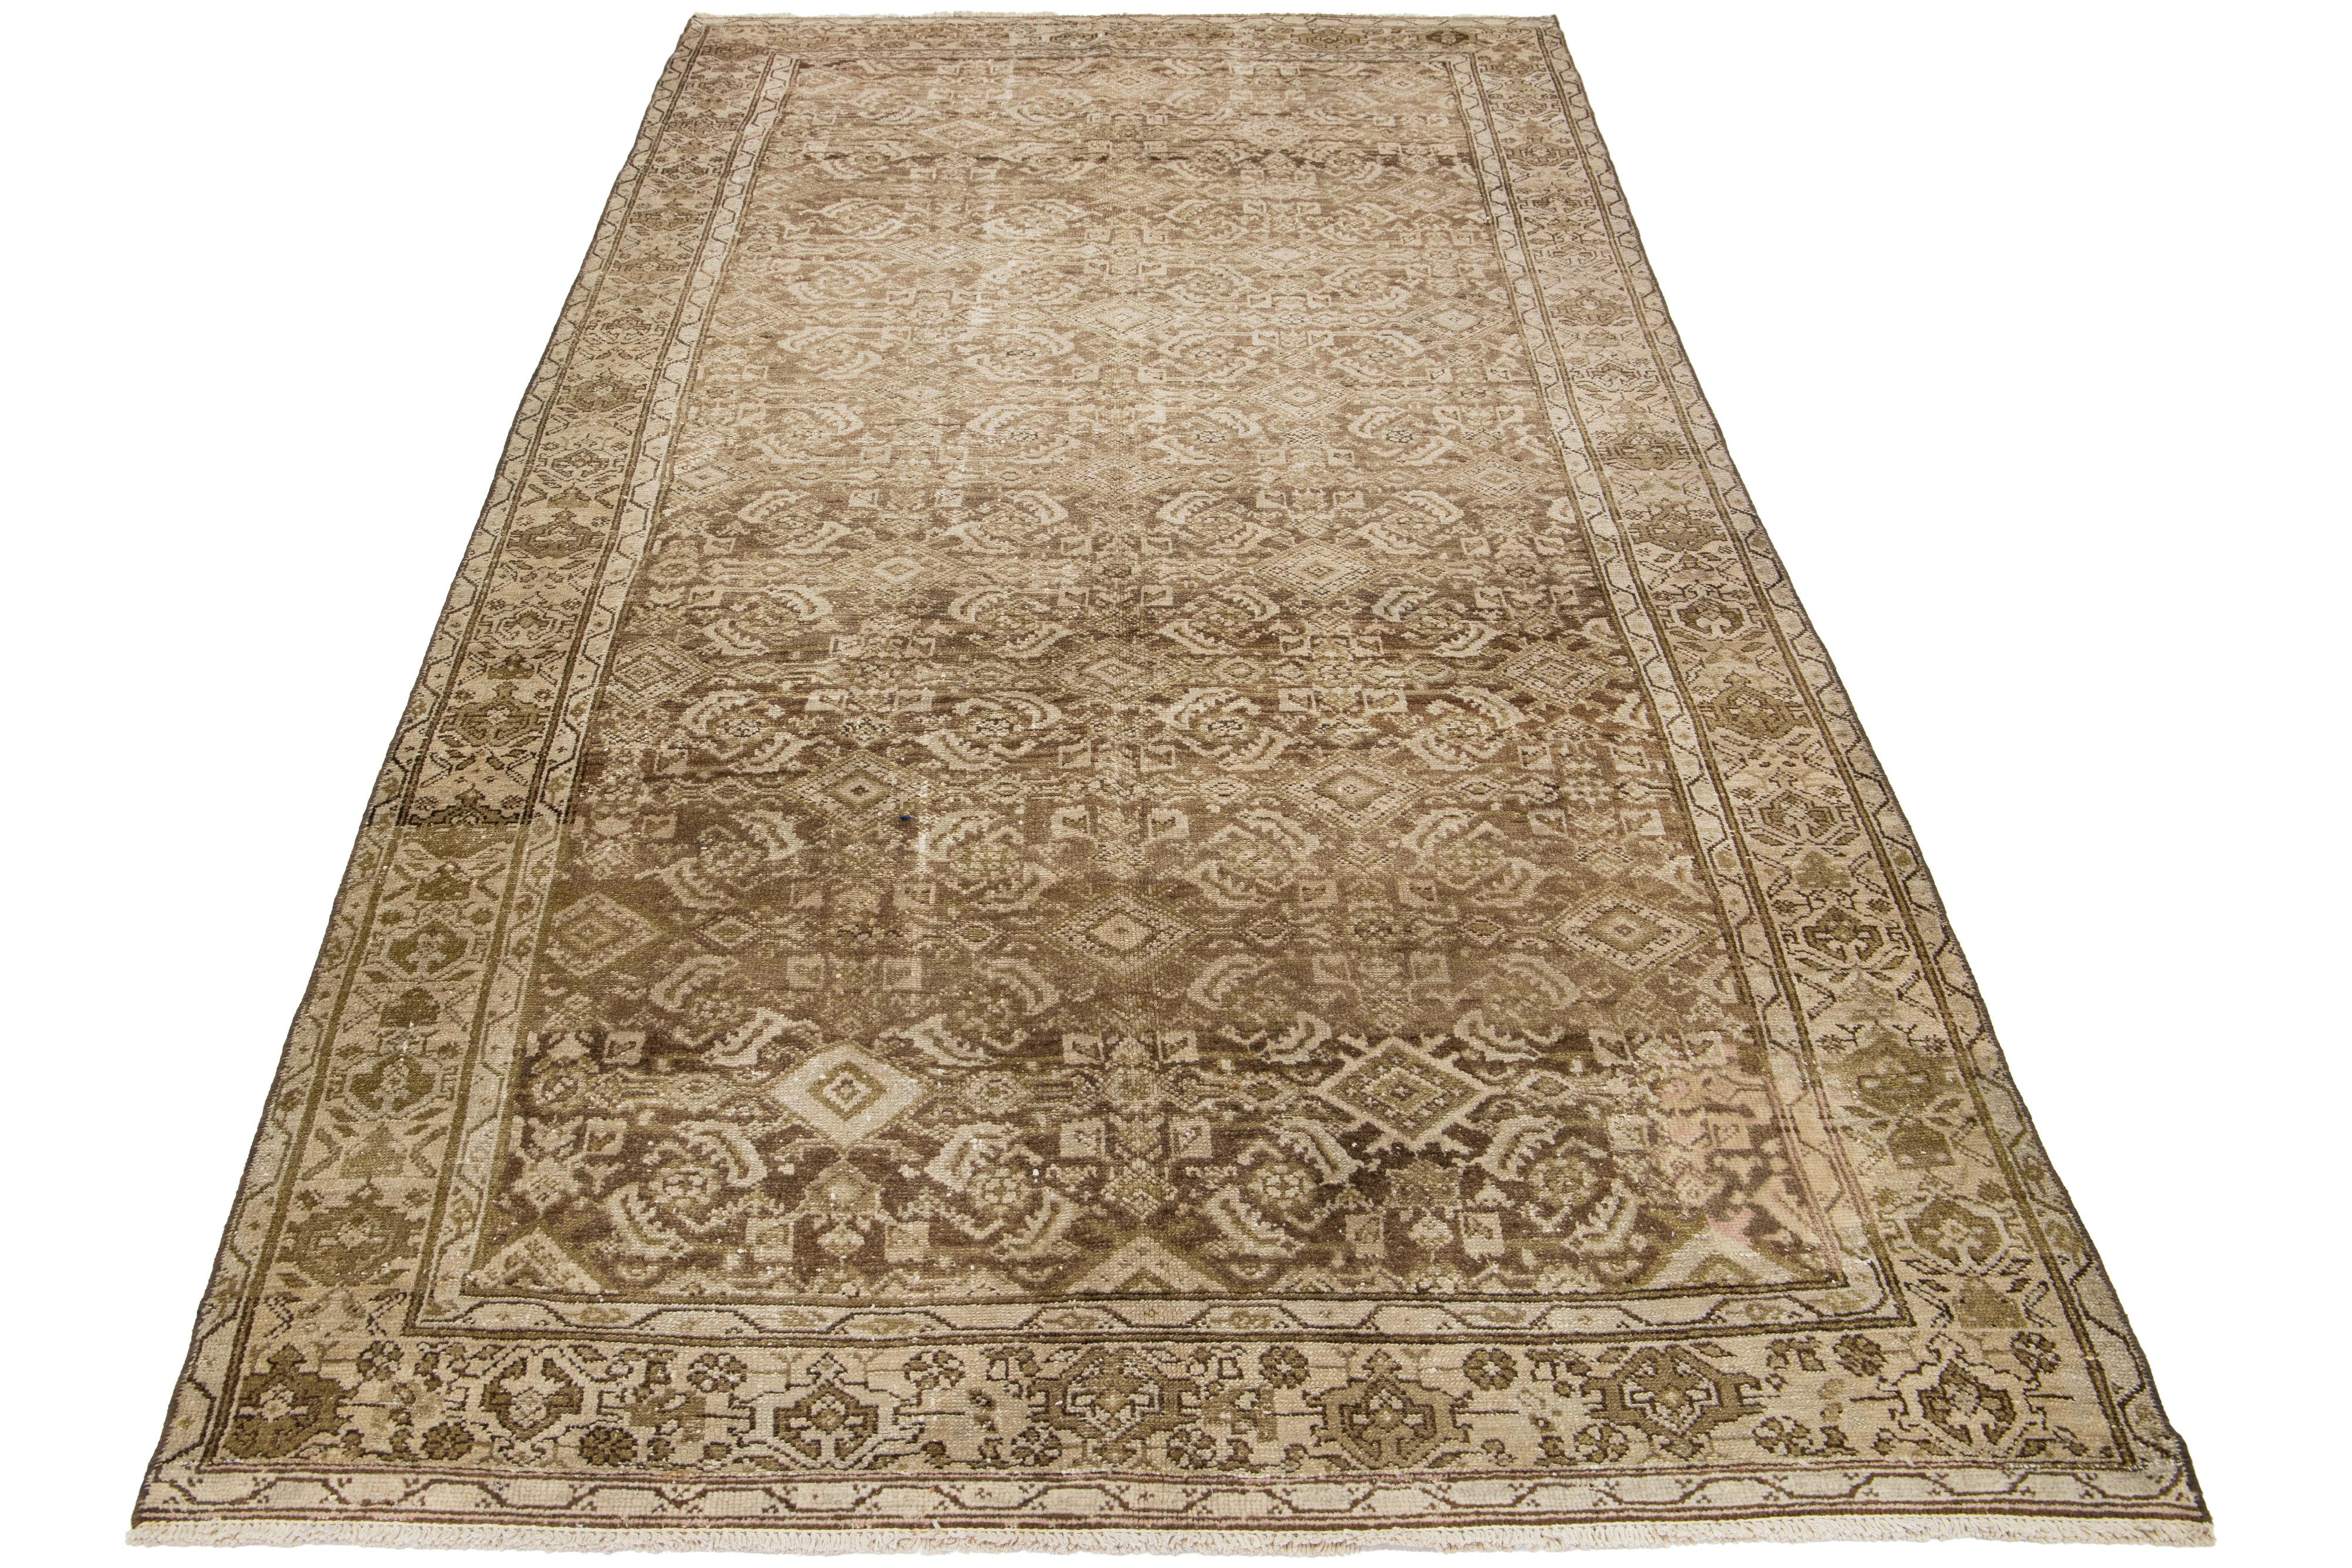 This is a handmade Persian Malayer wool rug from the 20th century. It features a beige field with brown accents throughout the design and is a large gallery size.

This rug measures 5'2